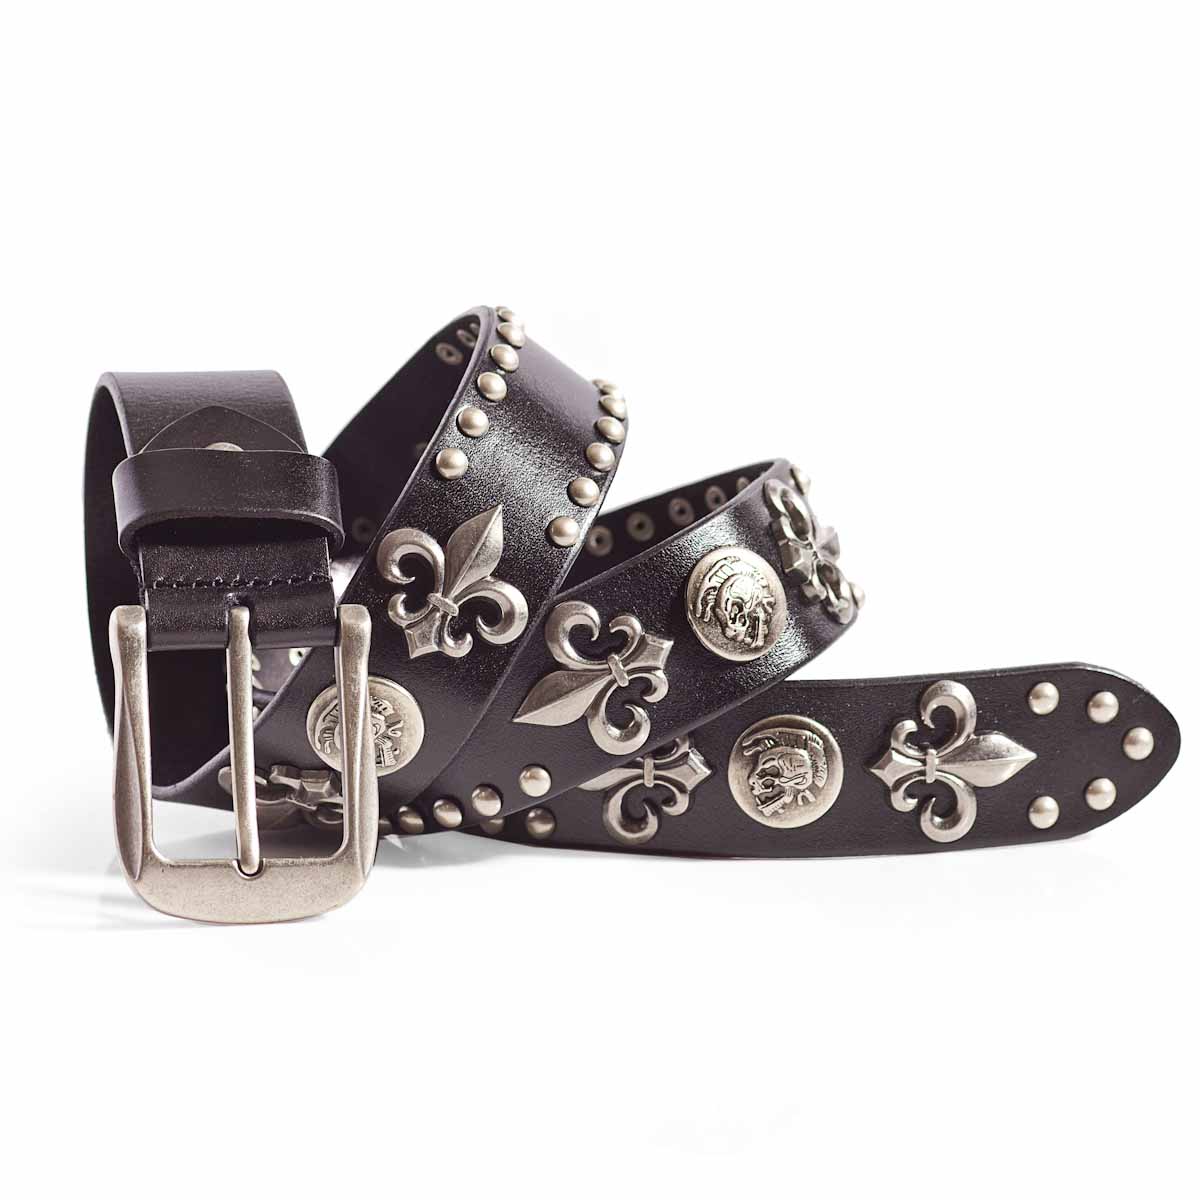 MNG Studded Belt black-bronze-colored casual look Accessories Belts Studded Belts 